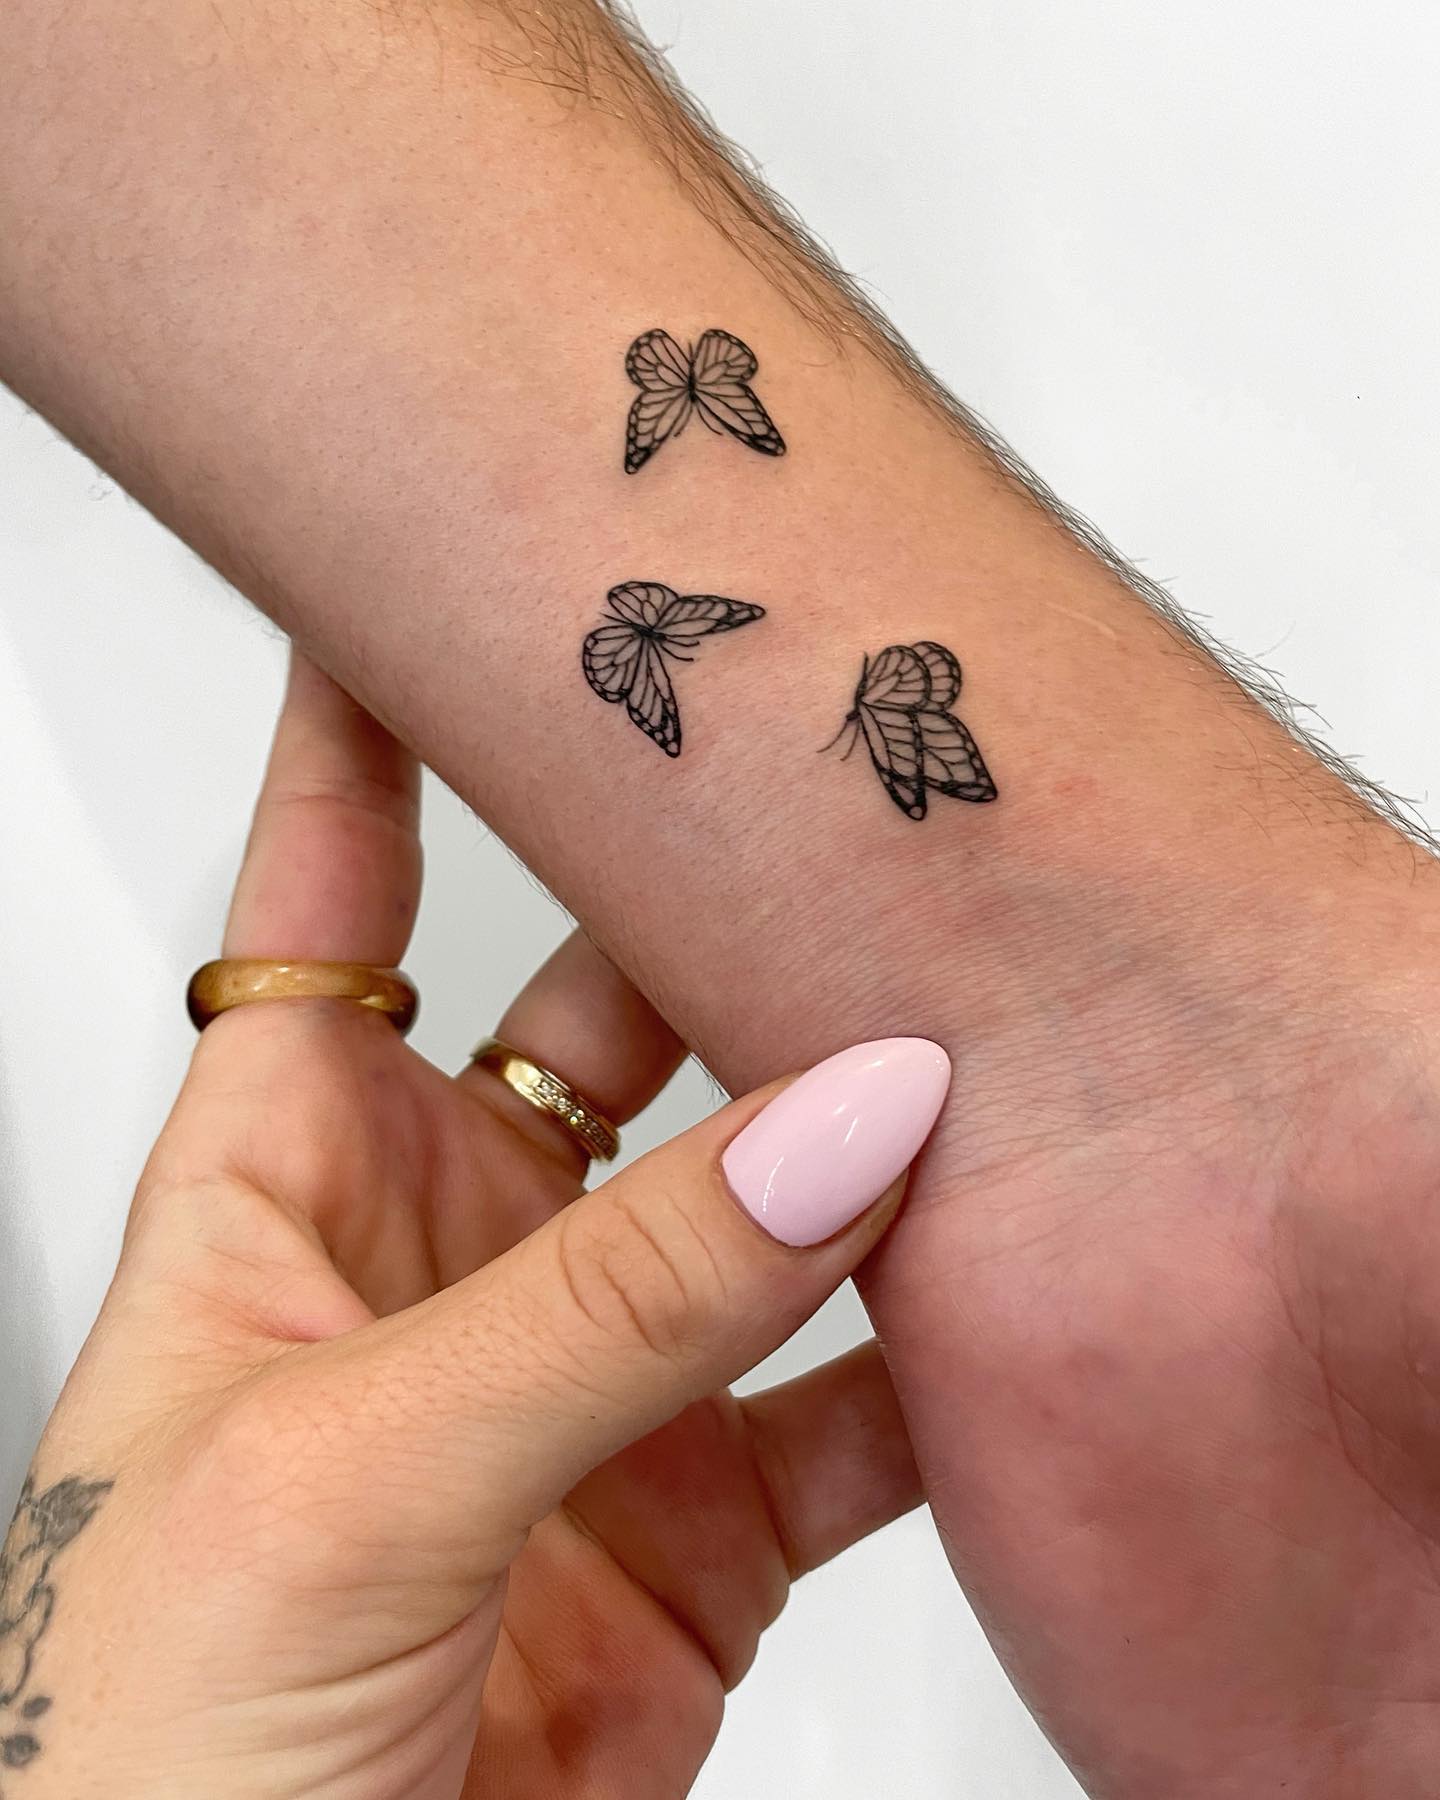 cool symbols for tattoos and their meanings